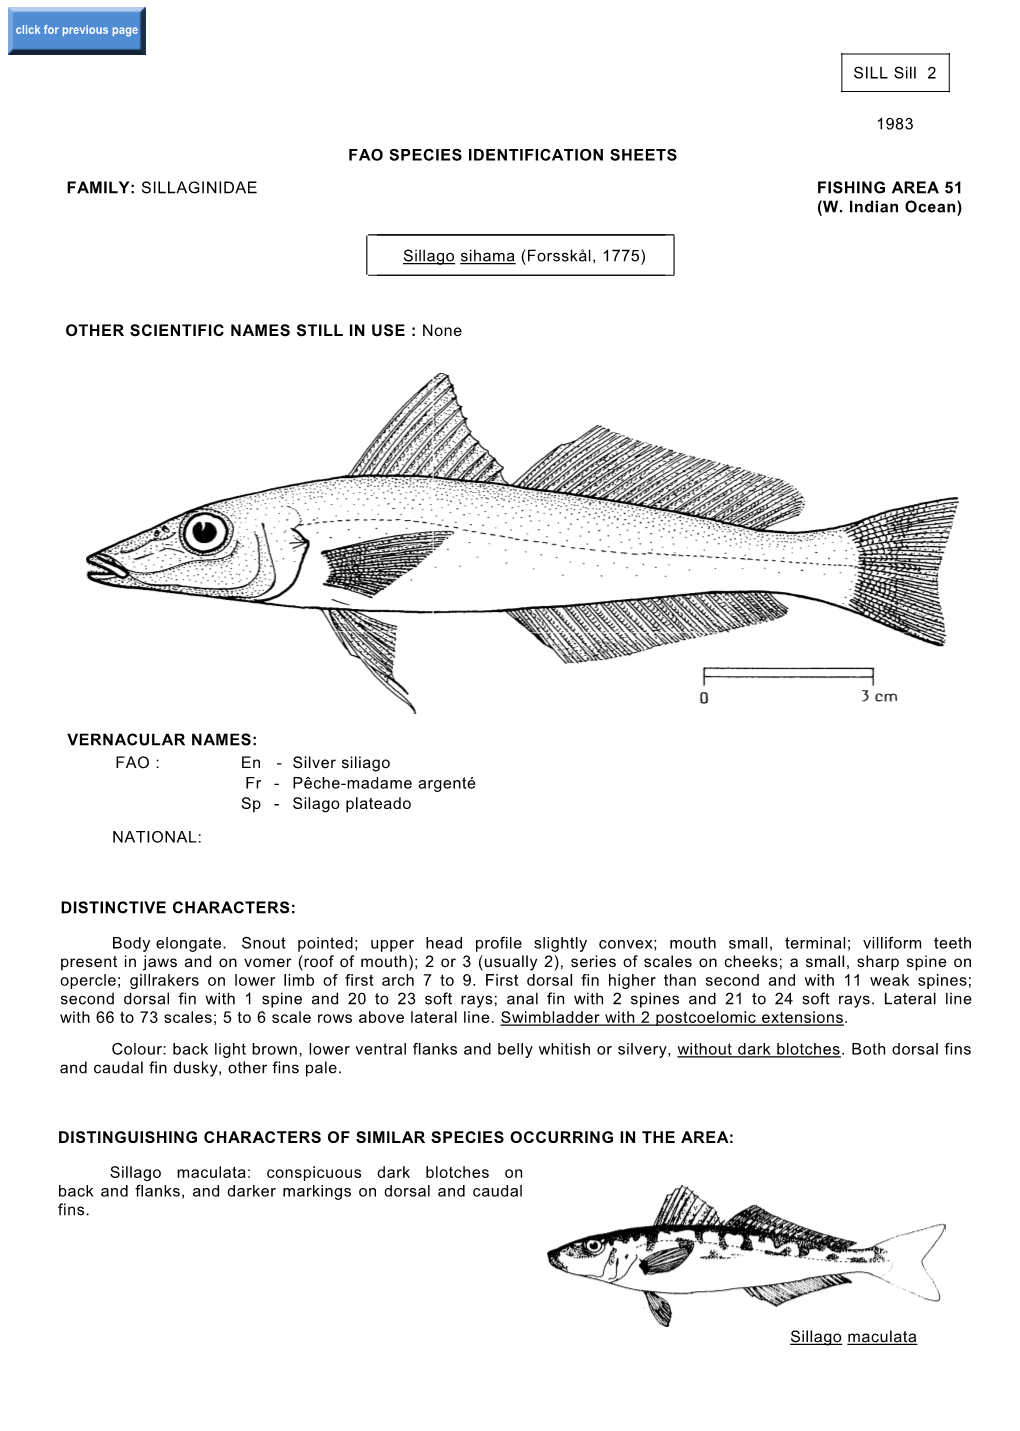 SILL Sill 2 1983 FAO SPECIES IDENTIFICATION SHEETS FAMILY: SILLAGINIDAE FISHING AREA 51 (W. Indian Ocean) Sillago Sihama (Forss